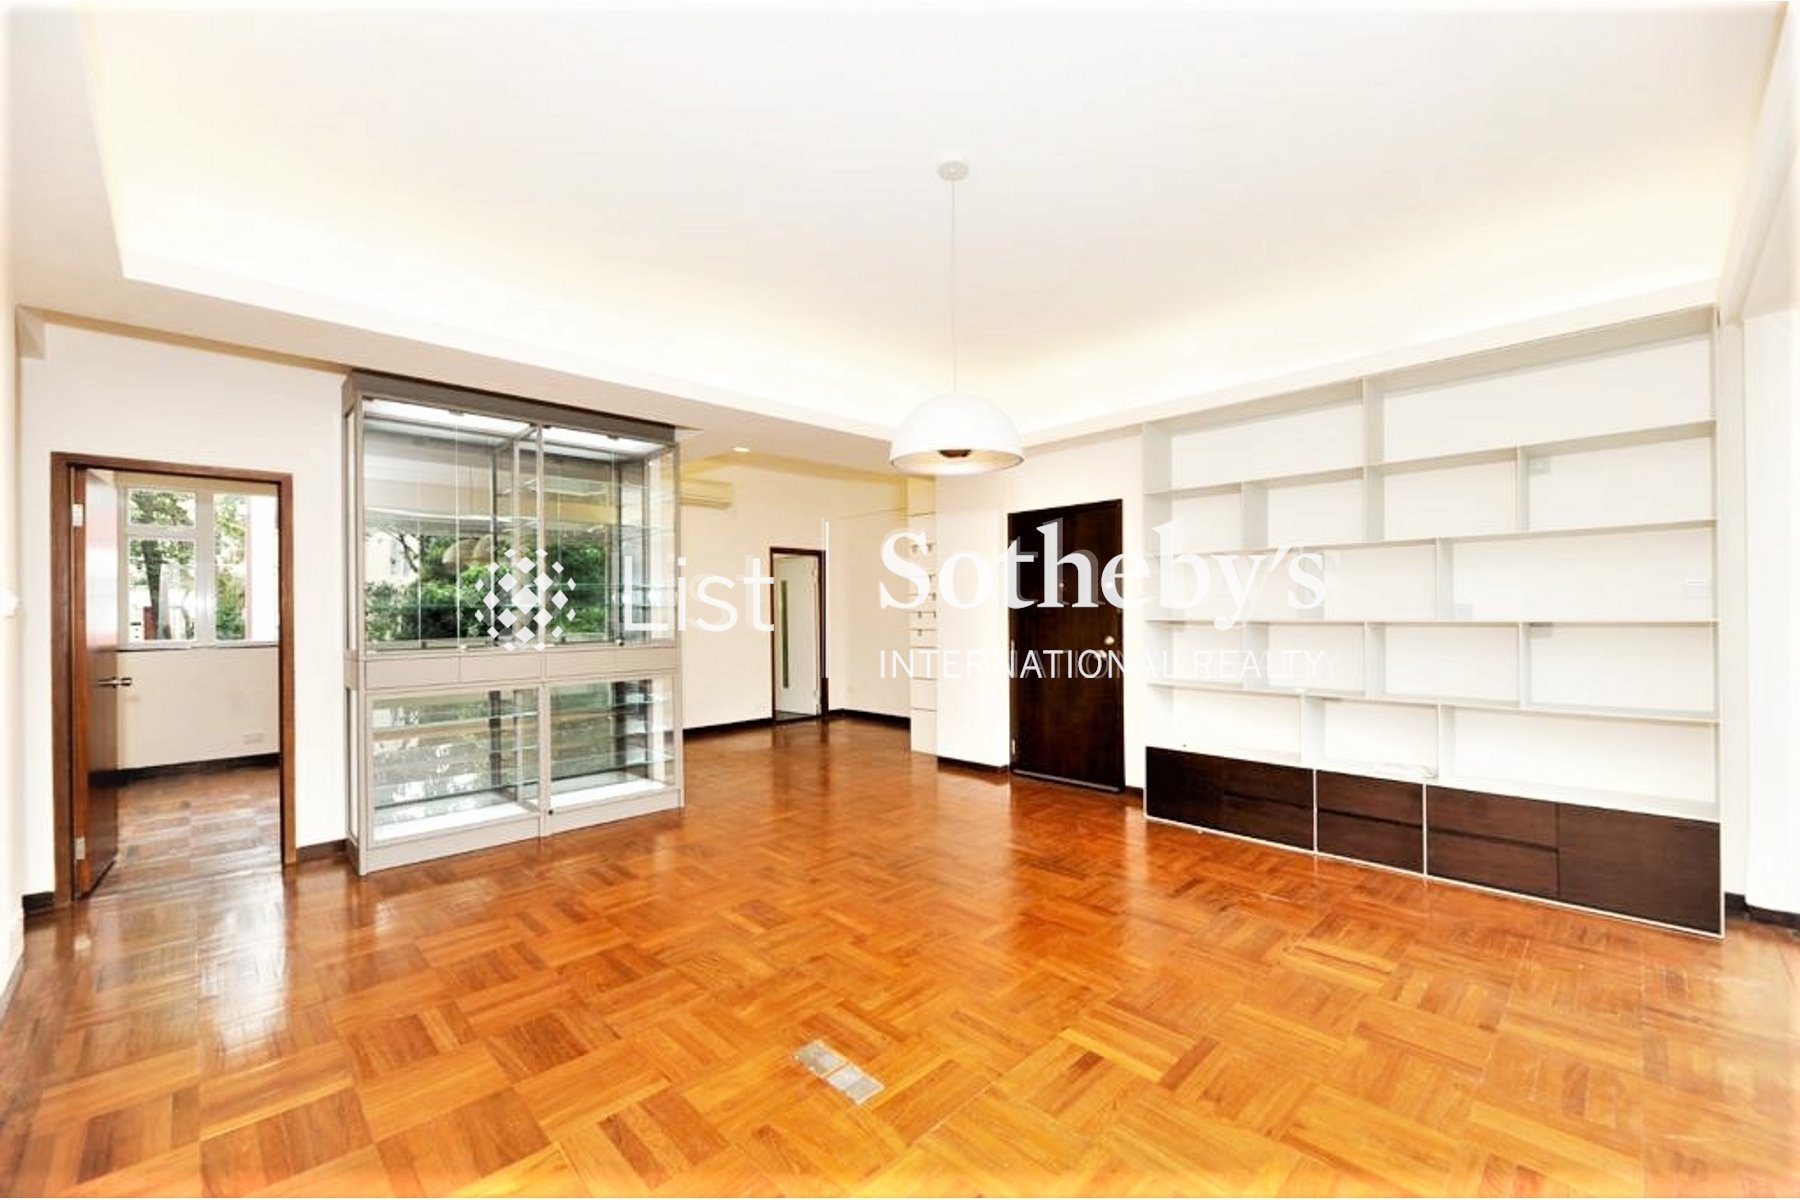 Nos. 2-6A Wilson Road 衛信道2-6A號 | Living and Dining Room